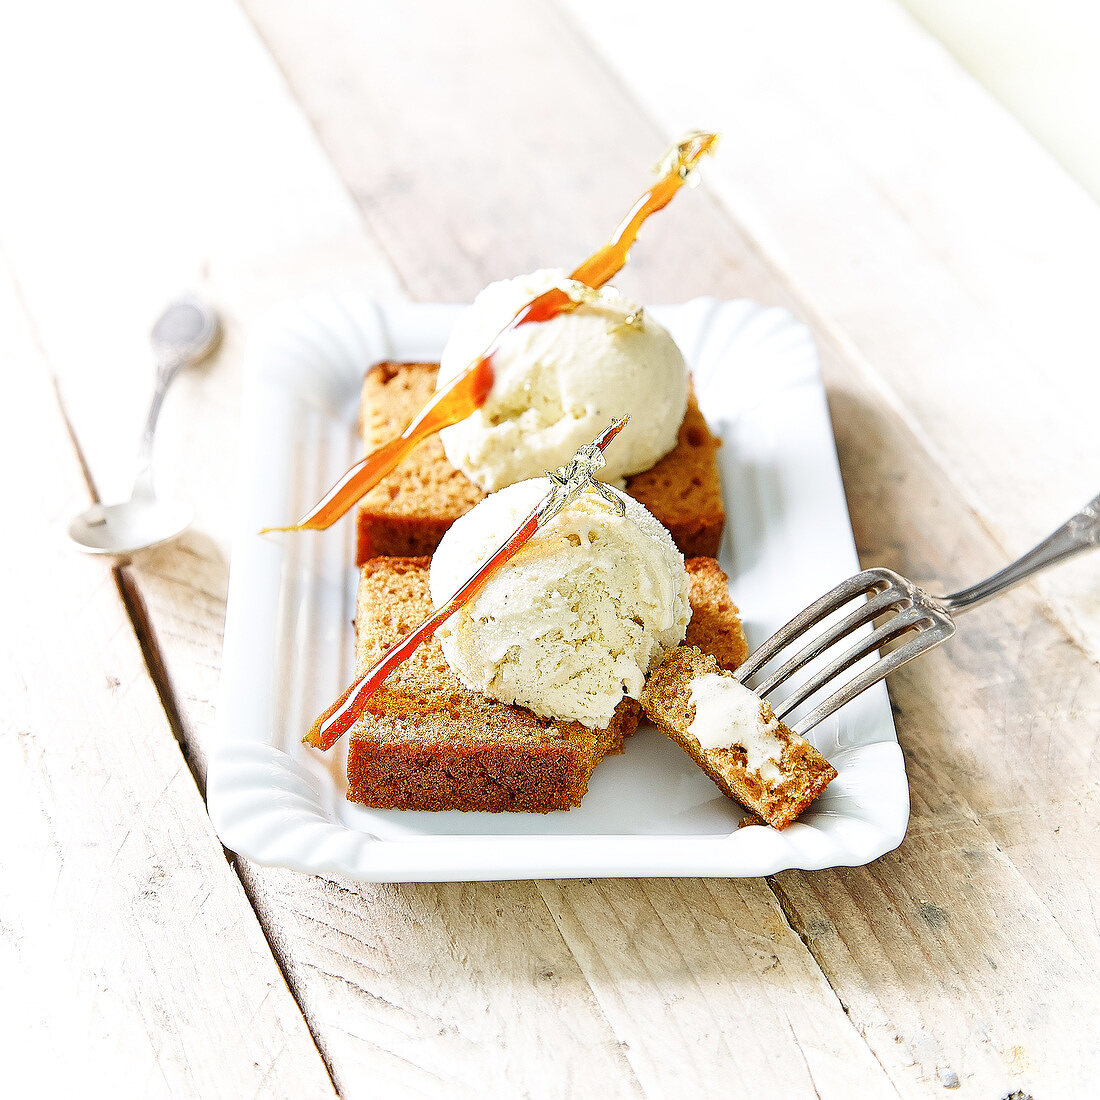 Vanilla ice cream on sliced gingerbread and topped with caramel sticks